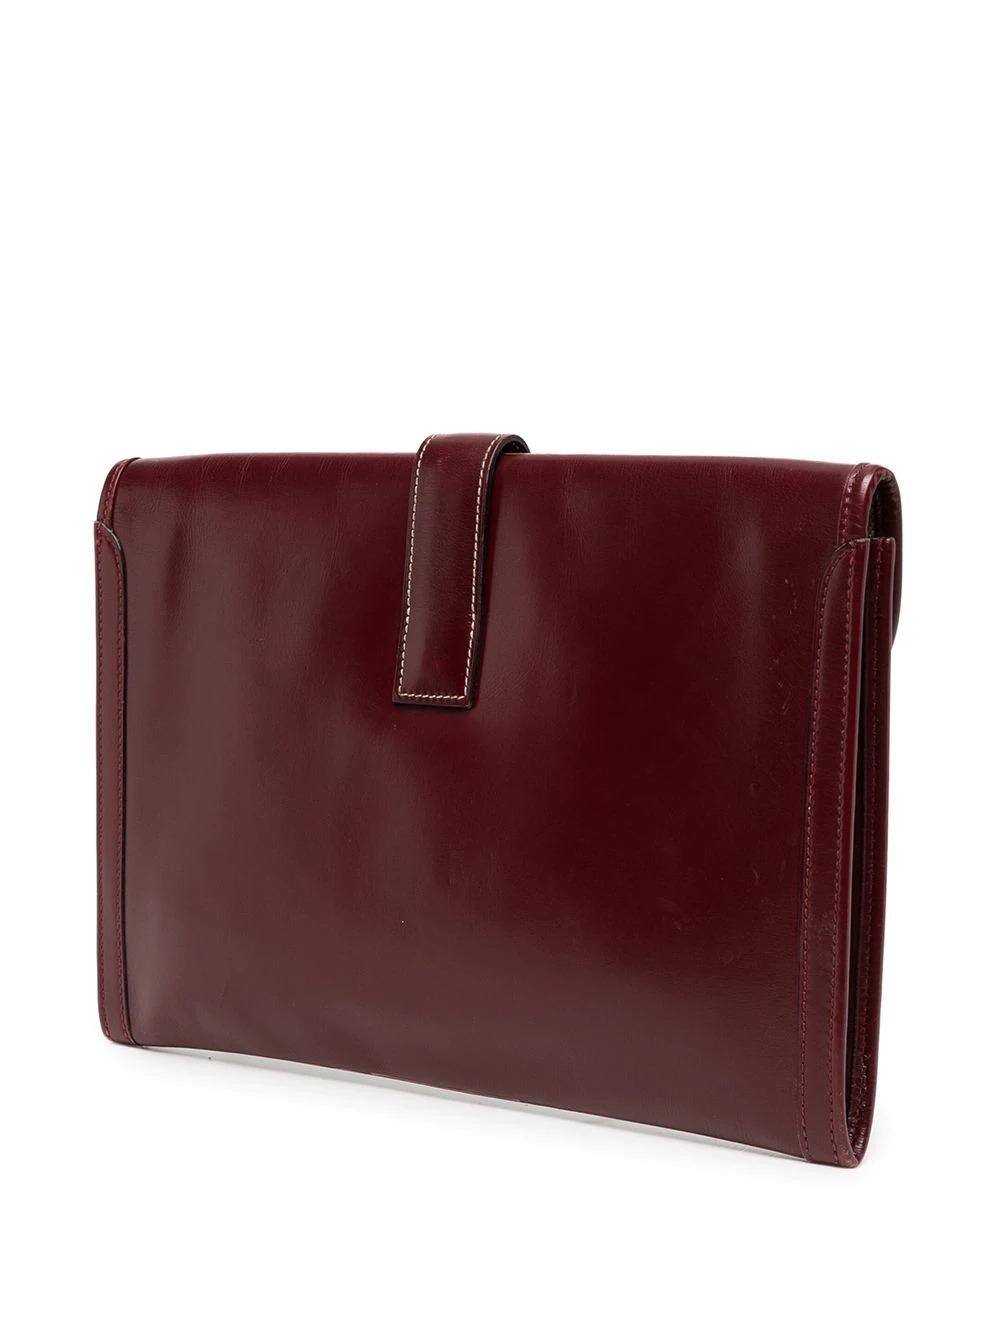 Customised Burgundy Jige Clutch Bag In Excellent Condition In London, GB